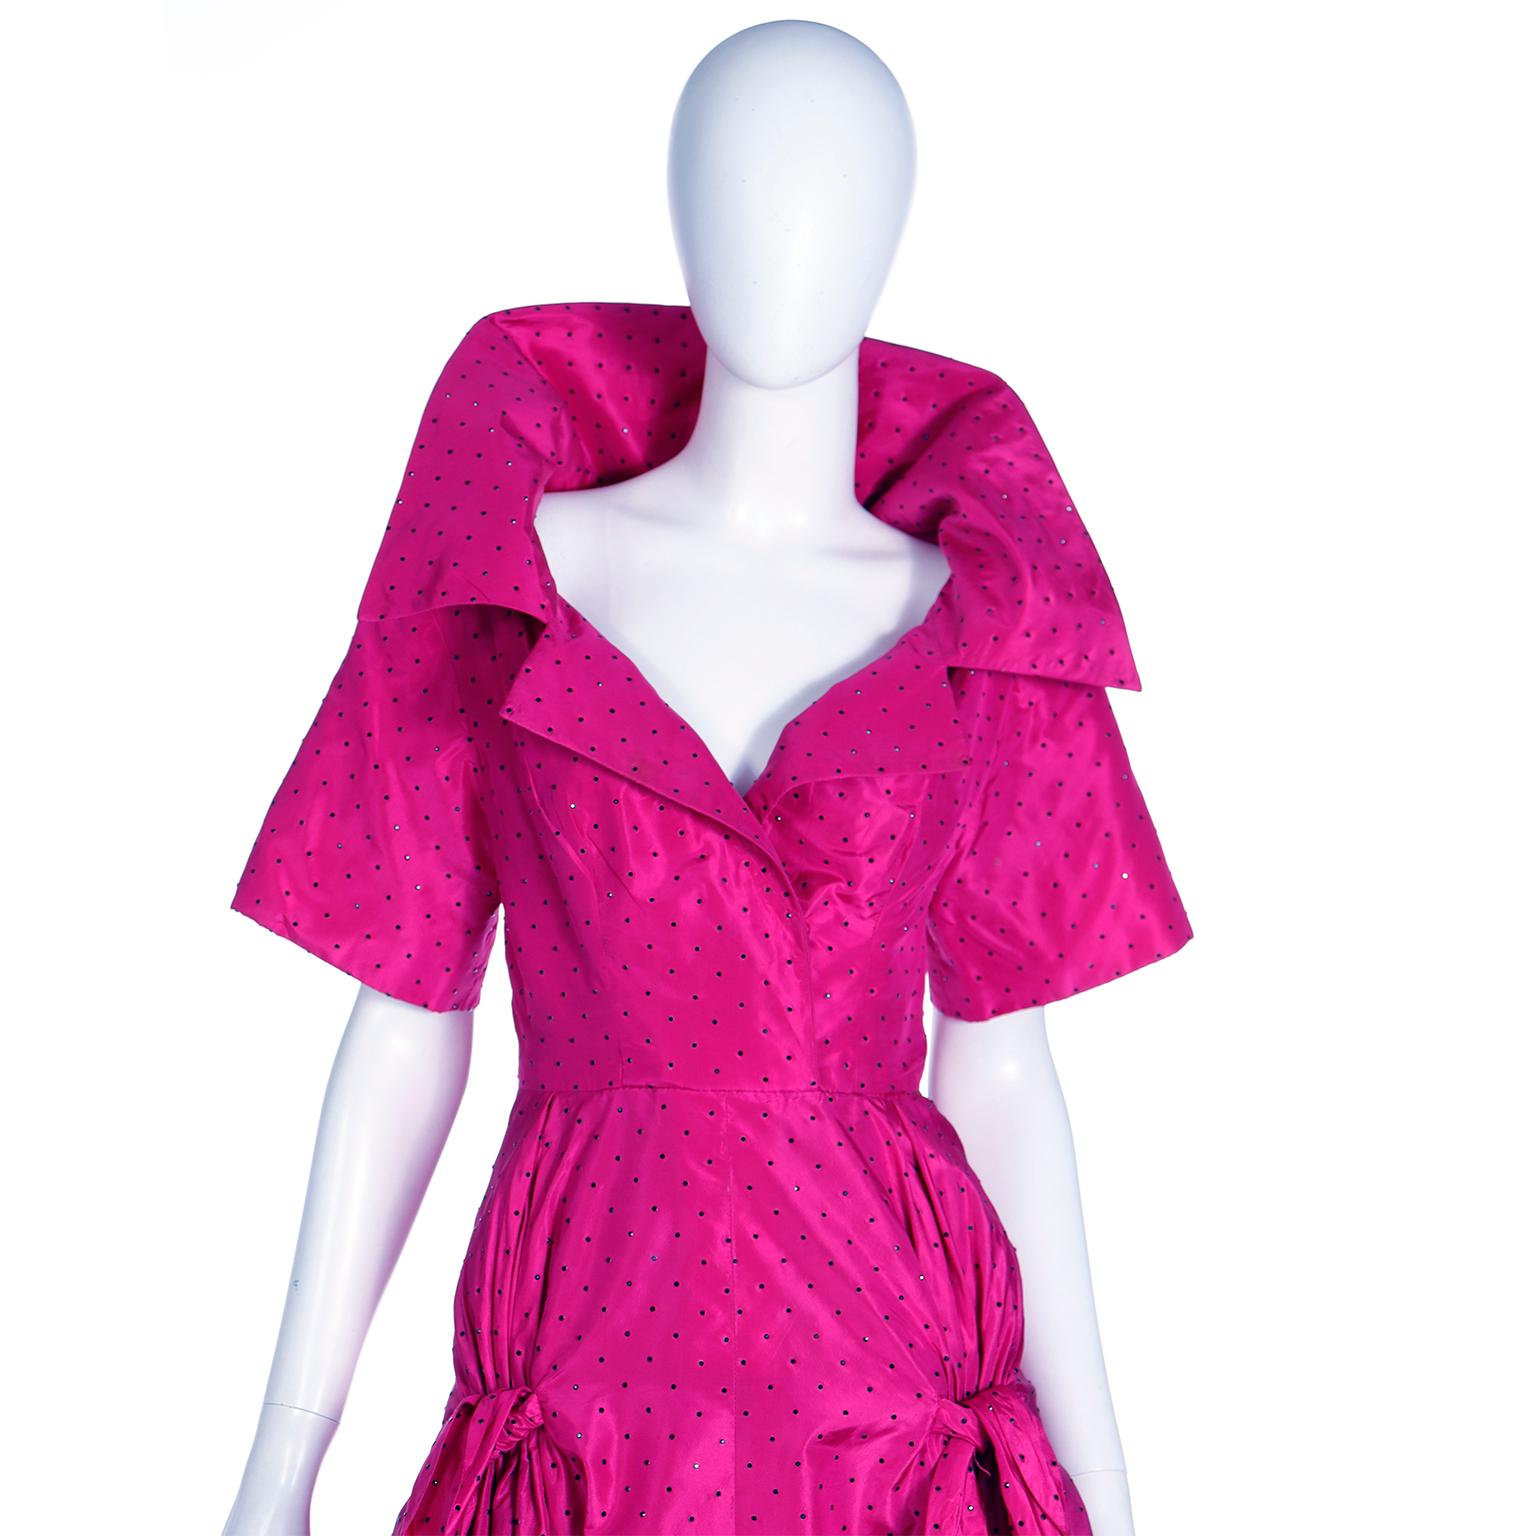 Christian Dior Couture 1987 Magenta Evening Dress w Crystals by Marc Bohan For Sale 11